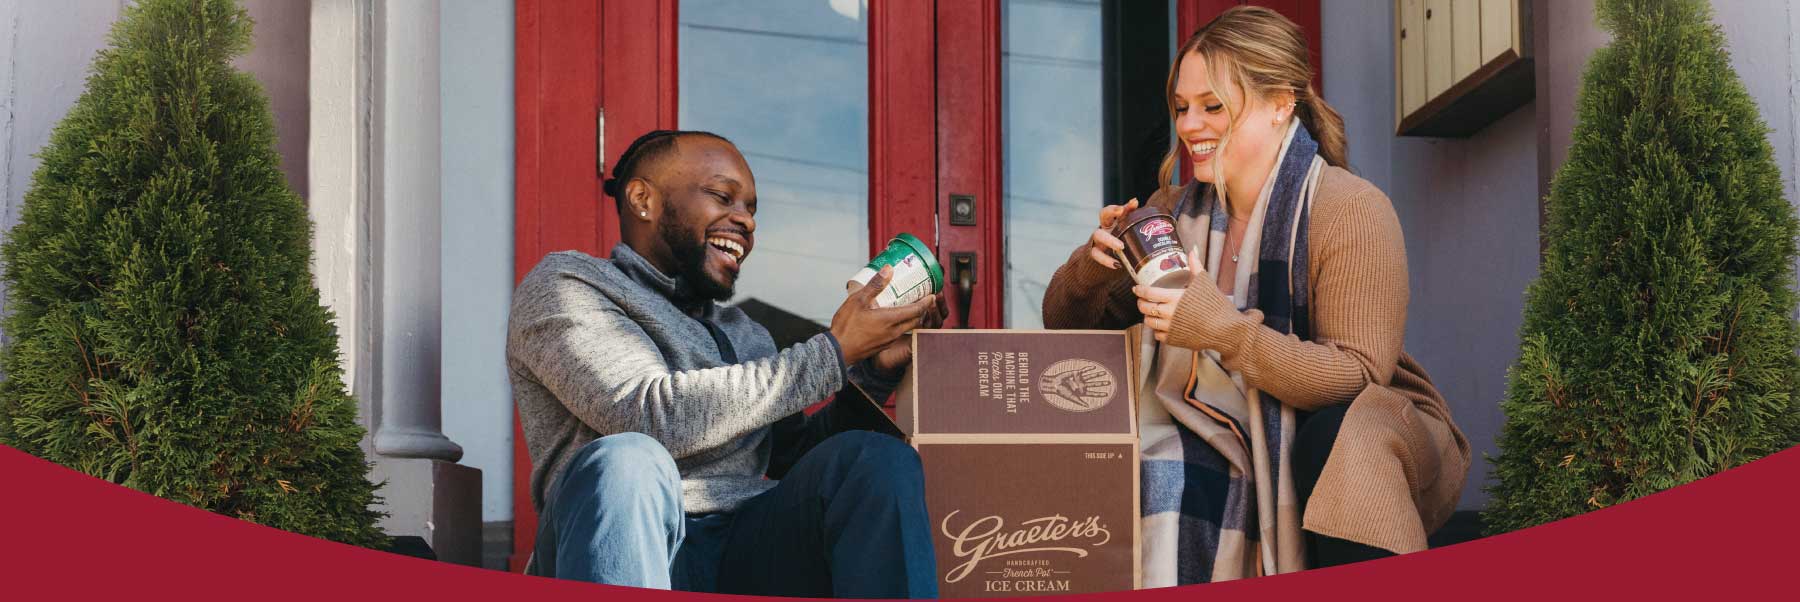 Couple opening Graeter's gift pack on doorstep